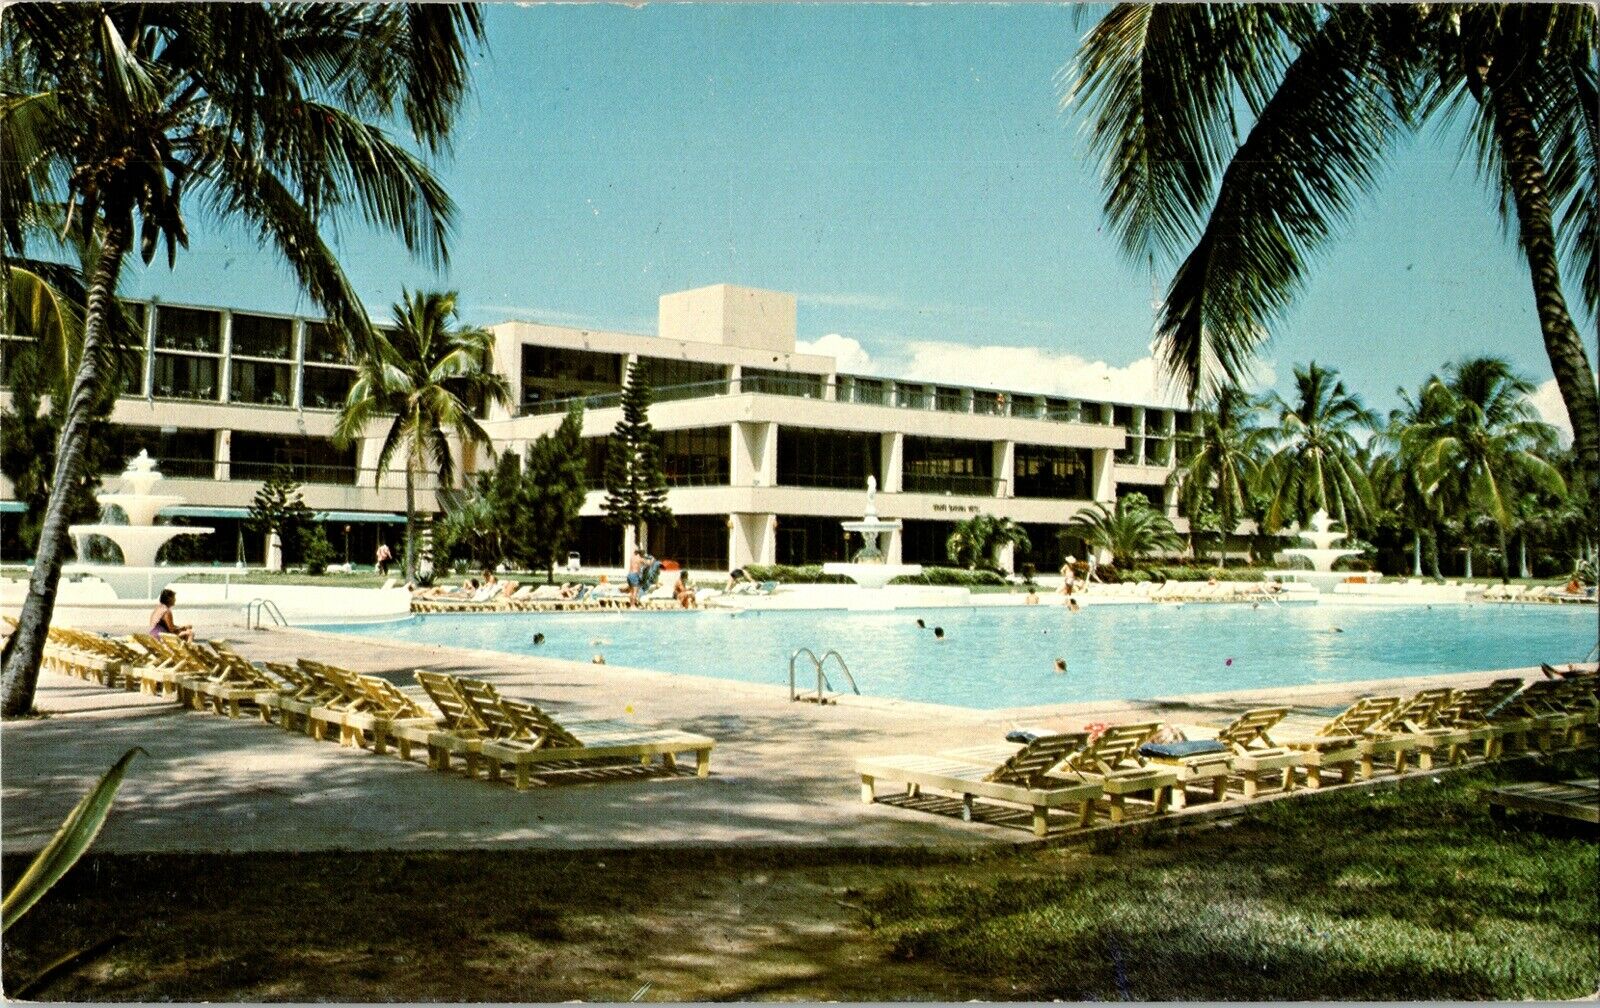 The Grand Bahama Hotel & Country Club